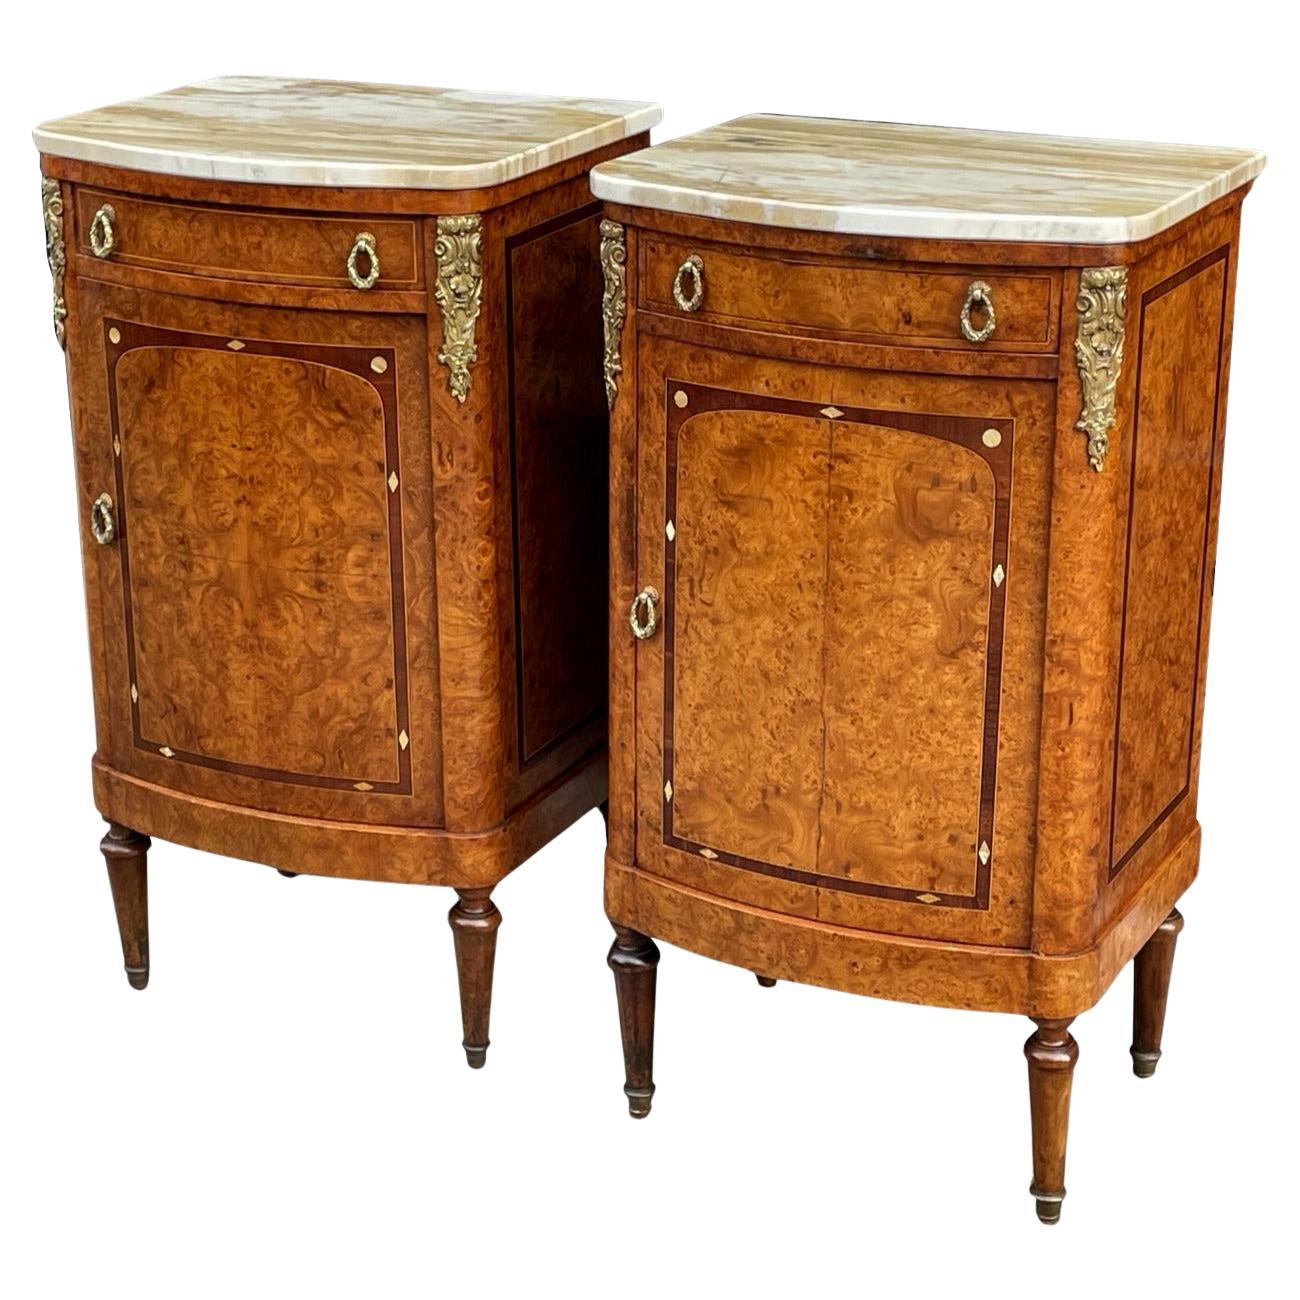 Antique French Ormolu Marble Top Santos Wood Bedside Cabinets Locker Nightstands For Sale